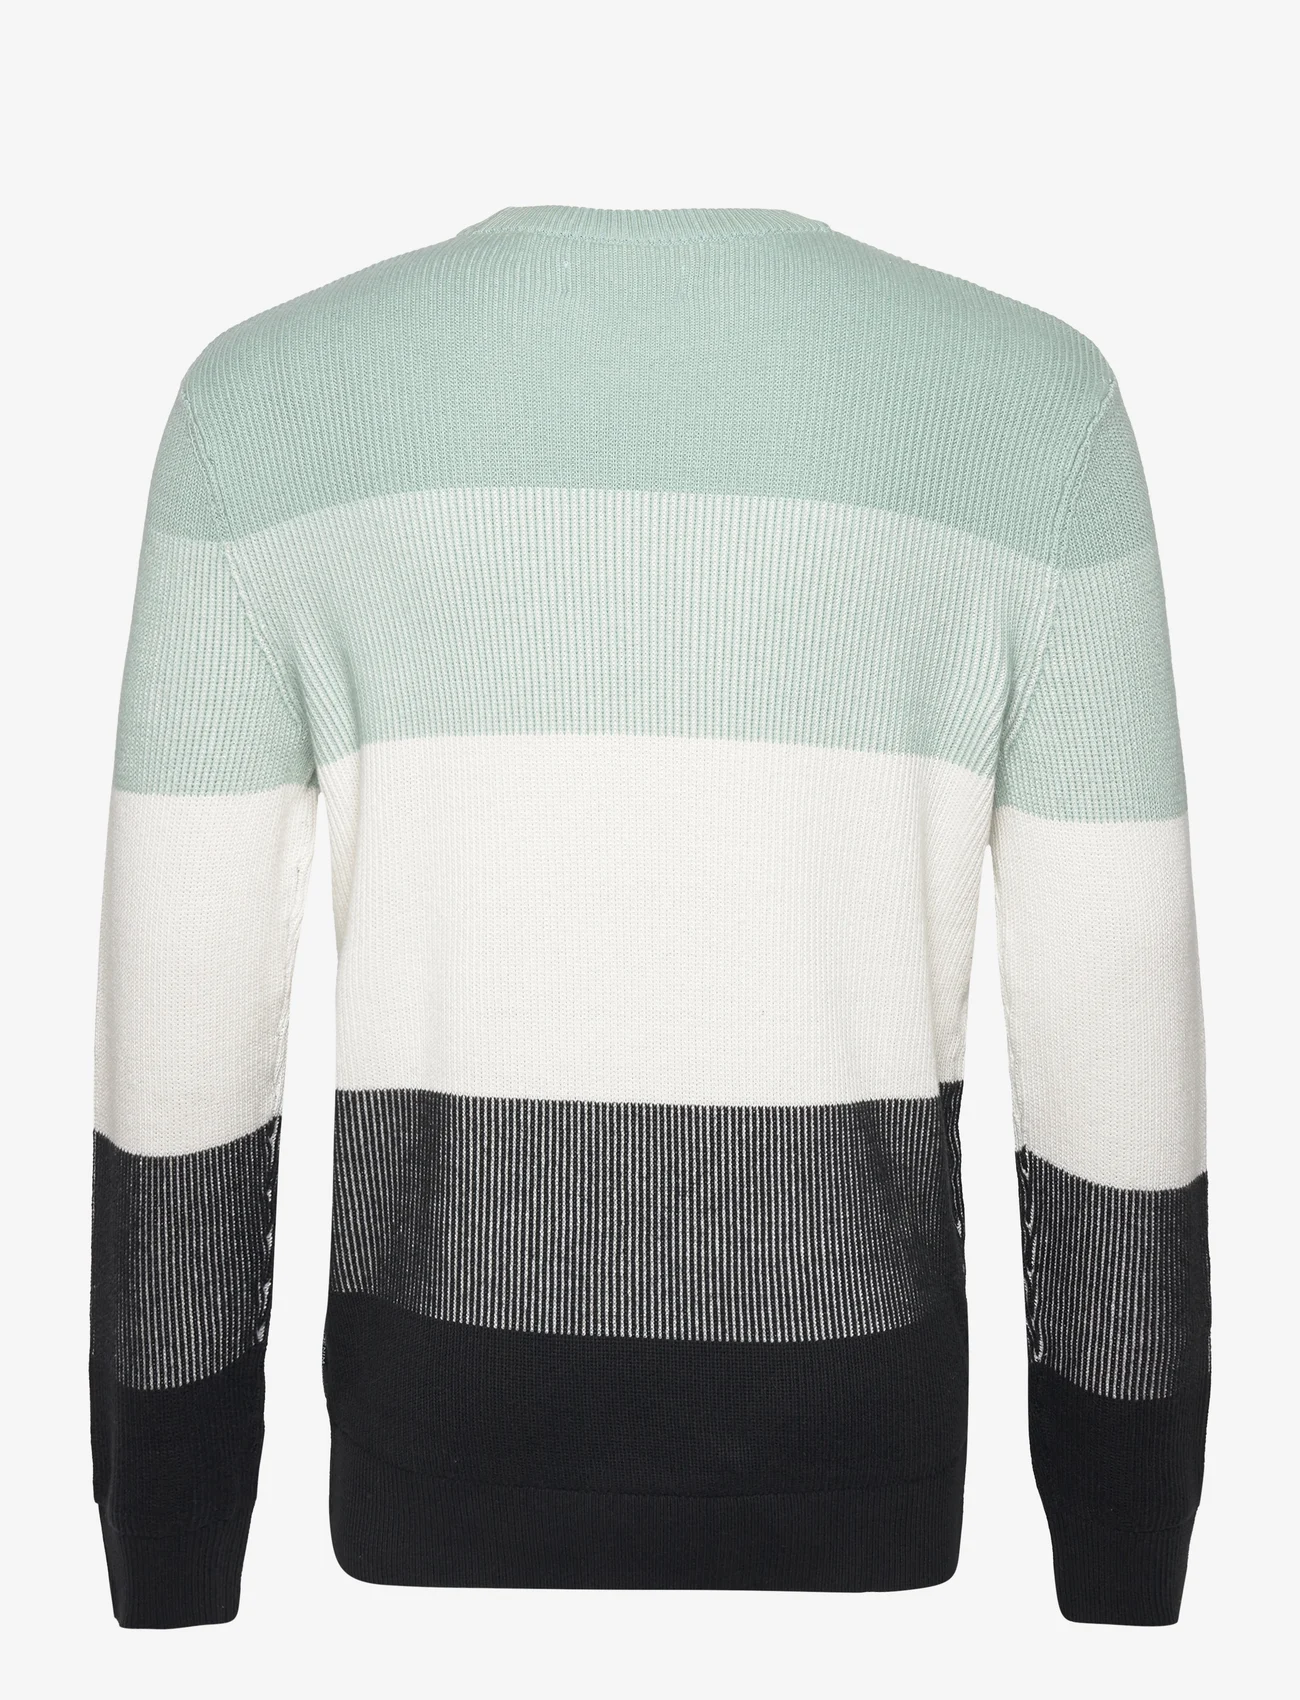 Tom Tailor - structured colorblock  knit - knitted round necks - mint white black colorblock - 1